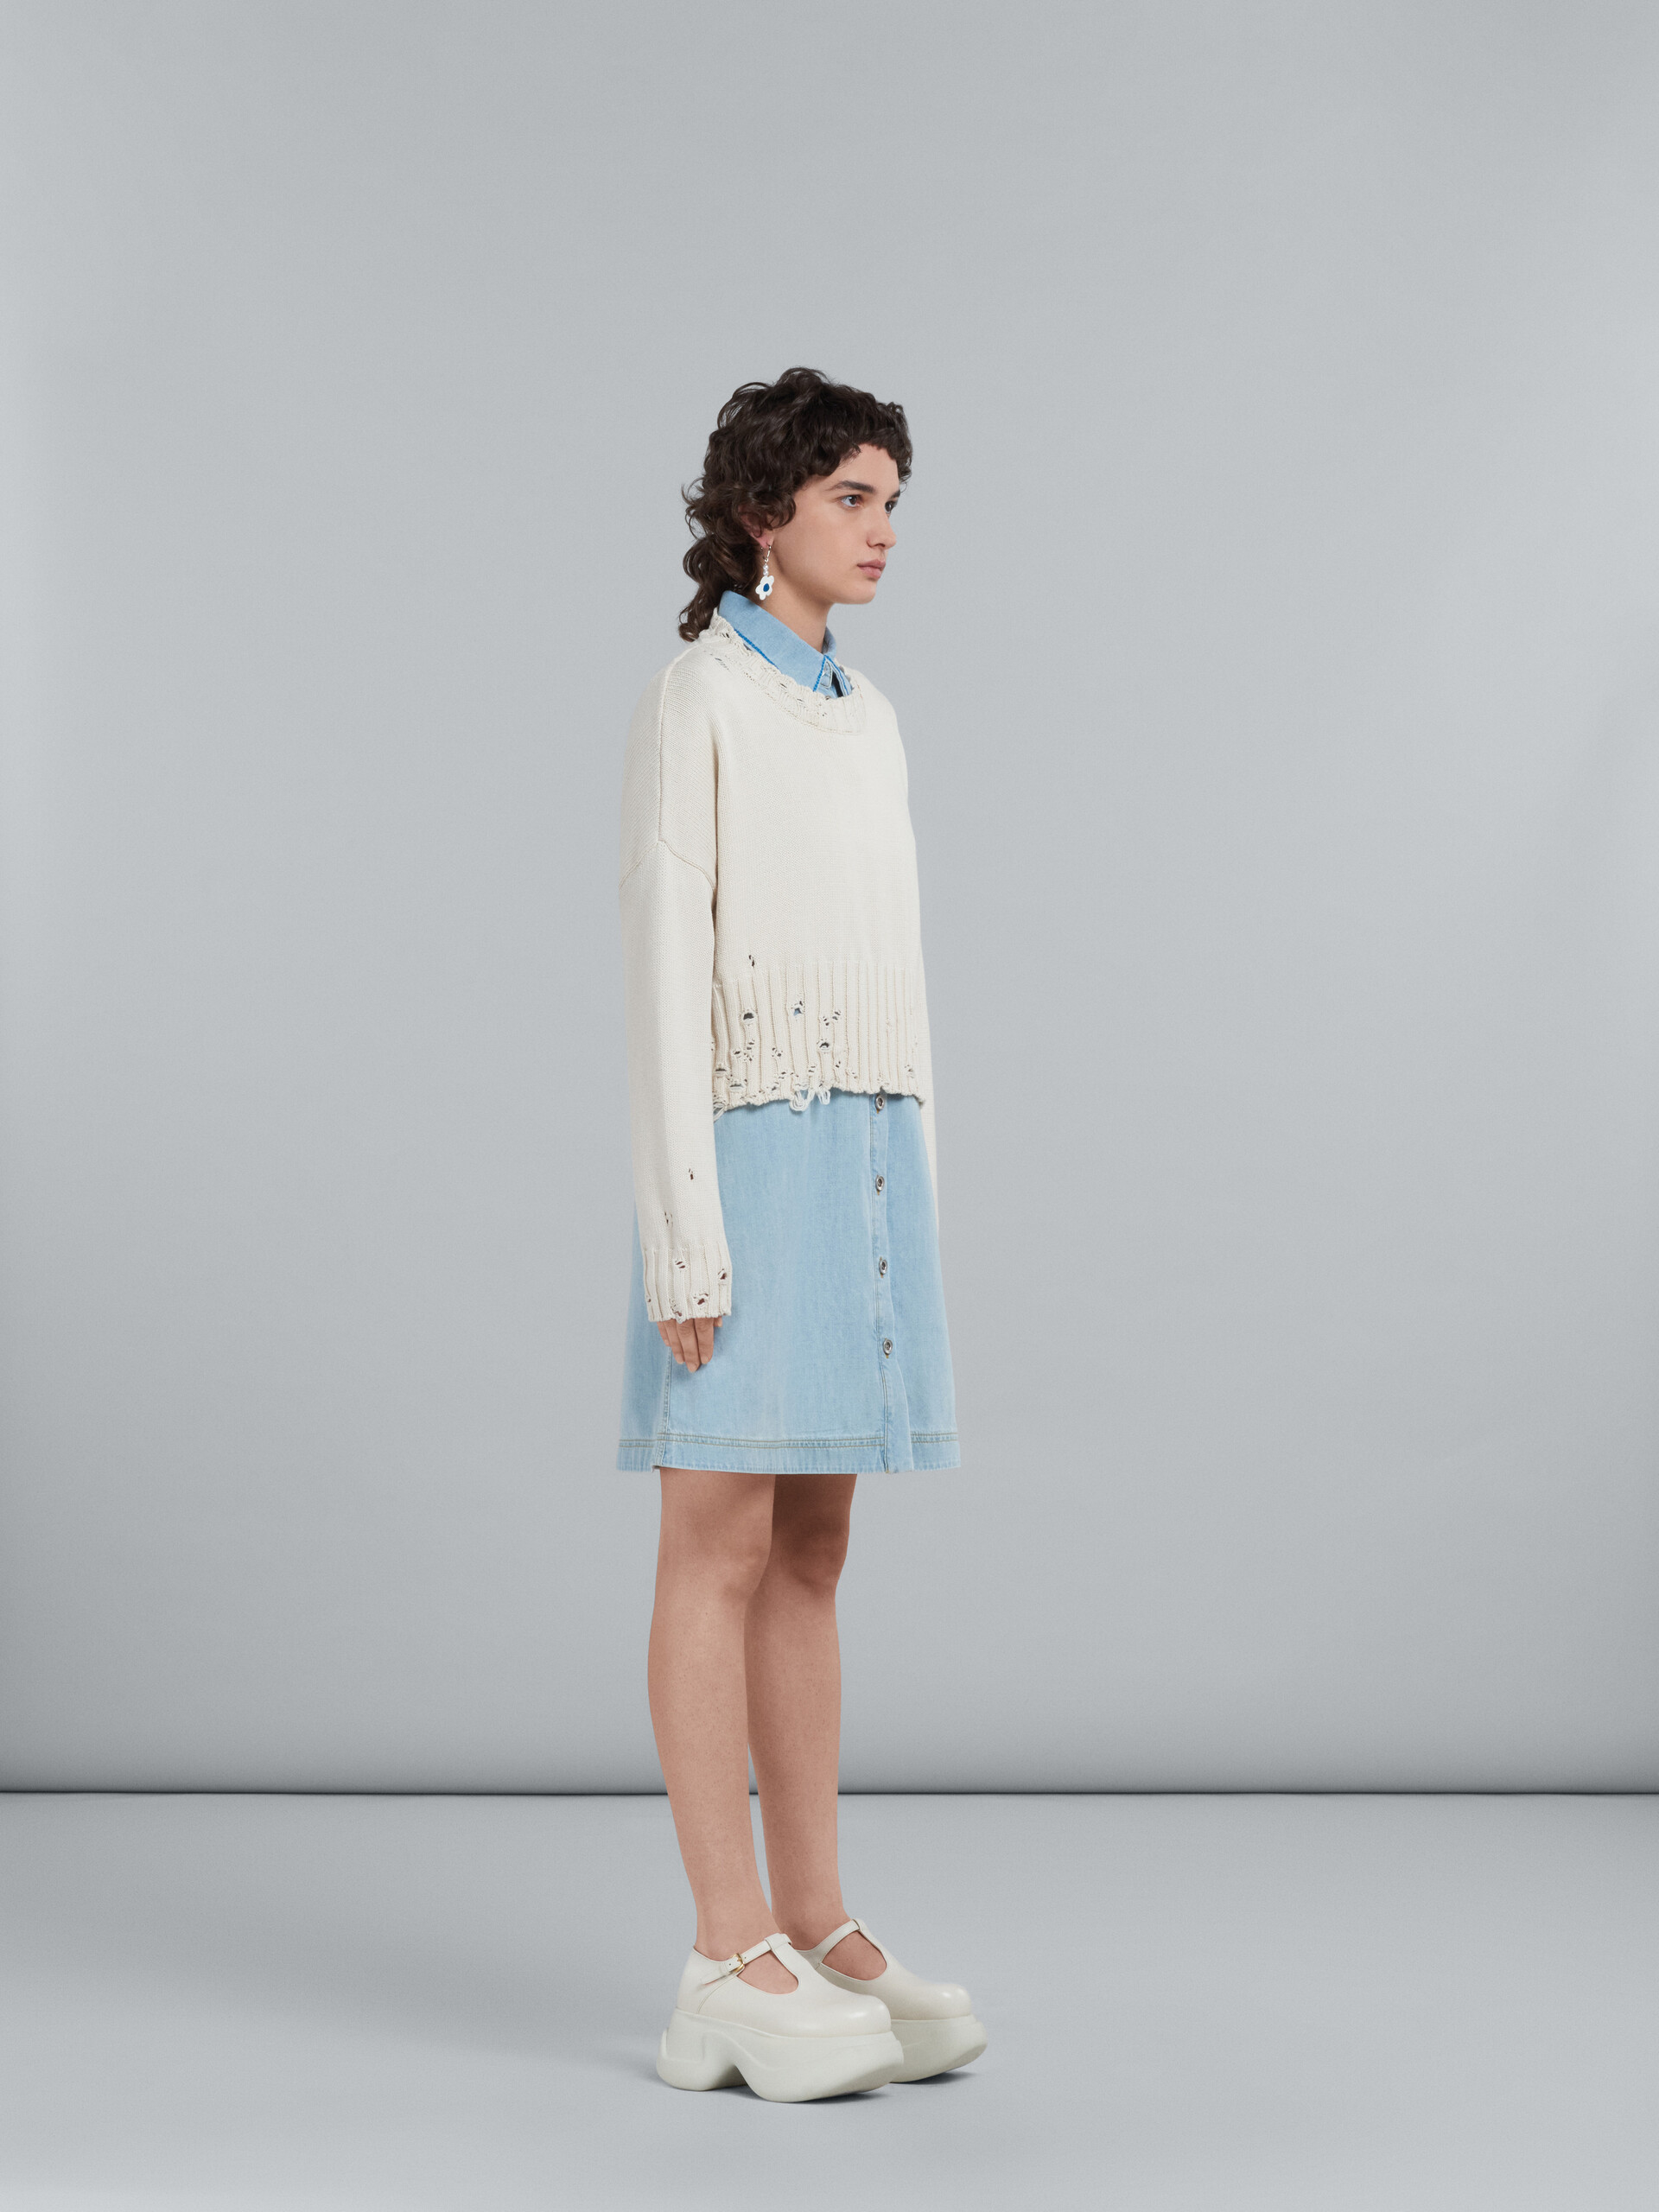 Light blue chambray dress with embroidery - Dresses - Image 6